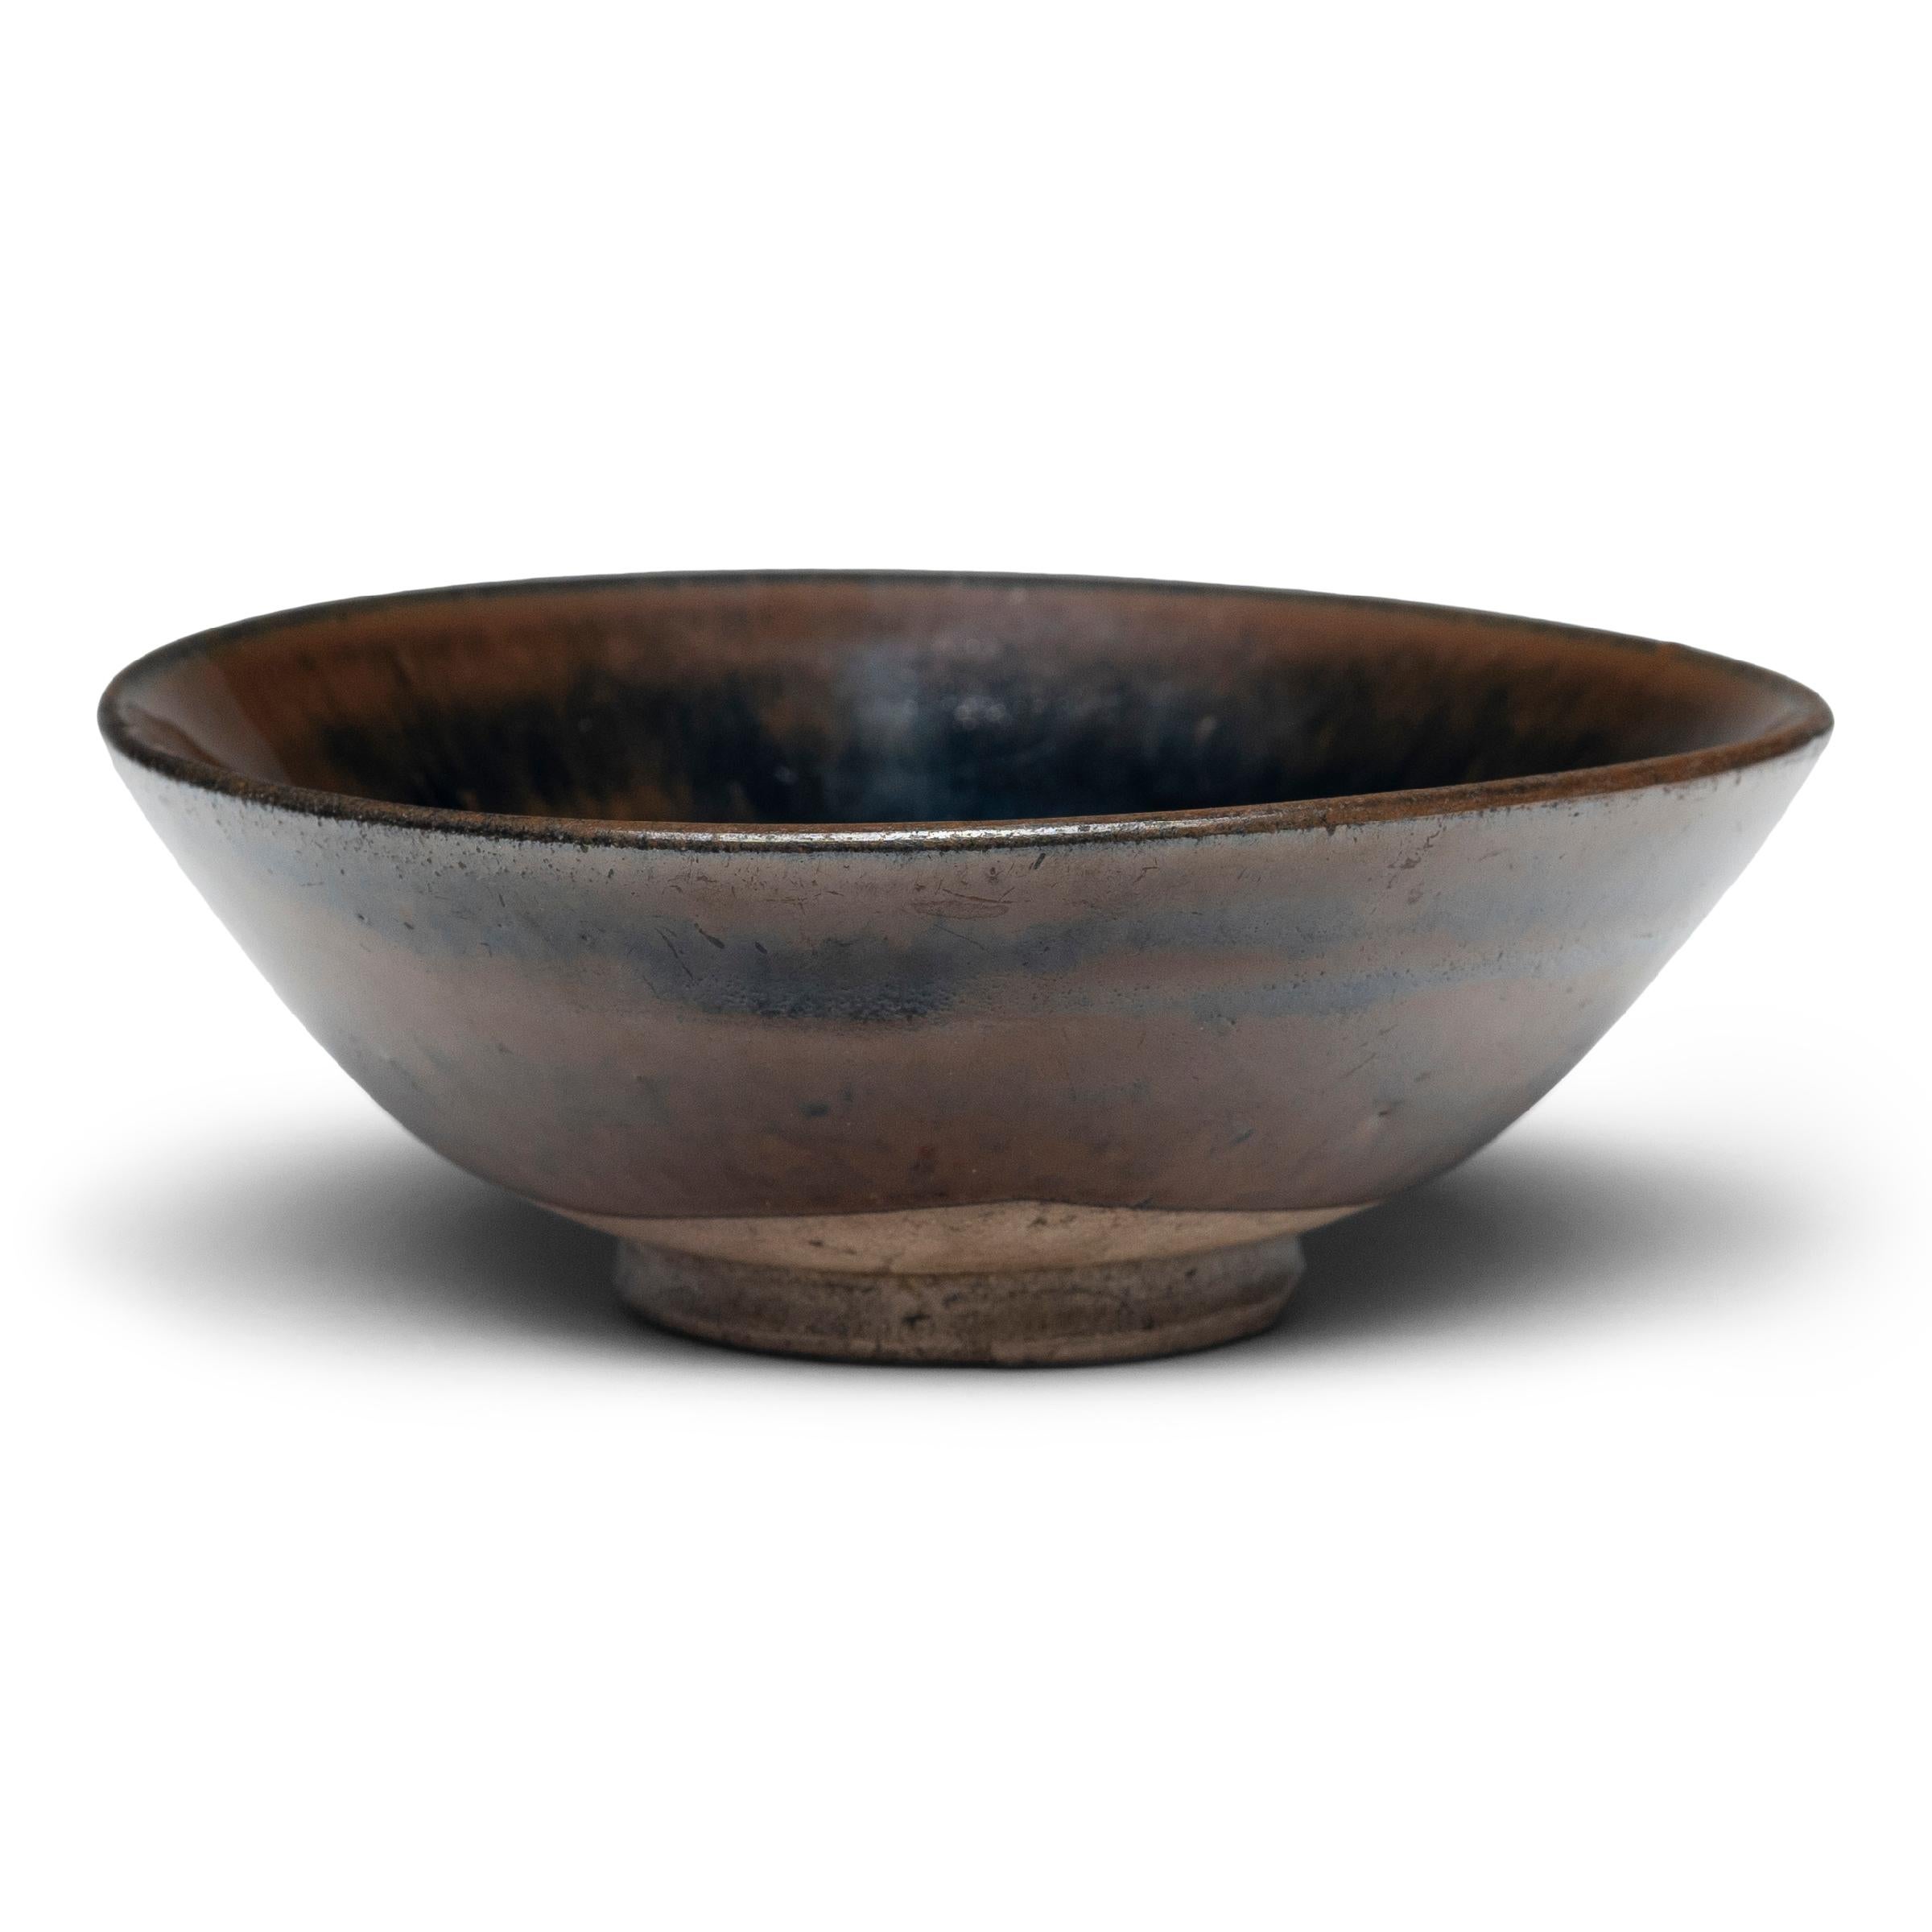 This darkly glazed stoneware bowl is simply shaped with tapered sides and a footed base. A rich, glossy glaze coats the bowl inside and out, streaking down the sides to reveal a depth of color ranging from light brown to dark green to inky black.